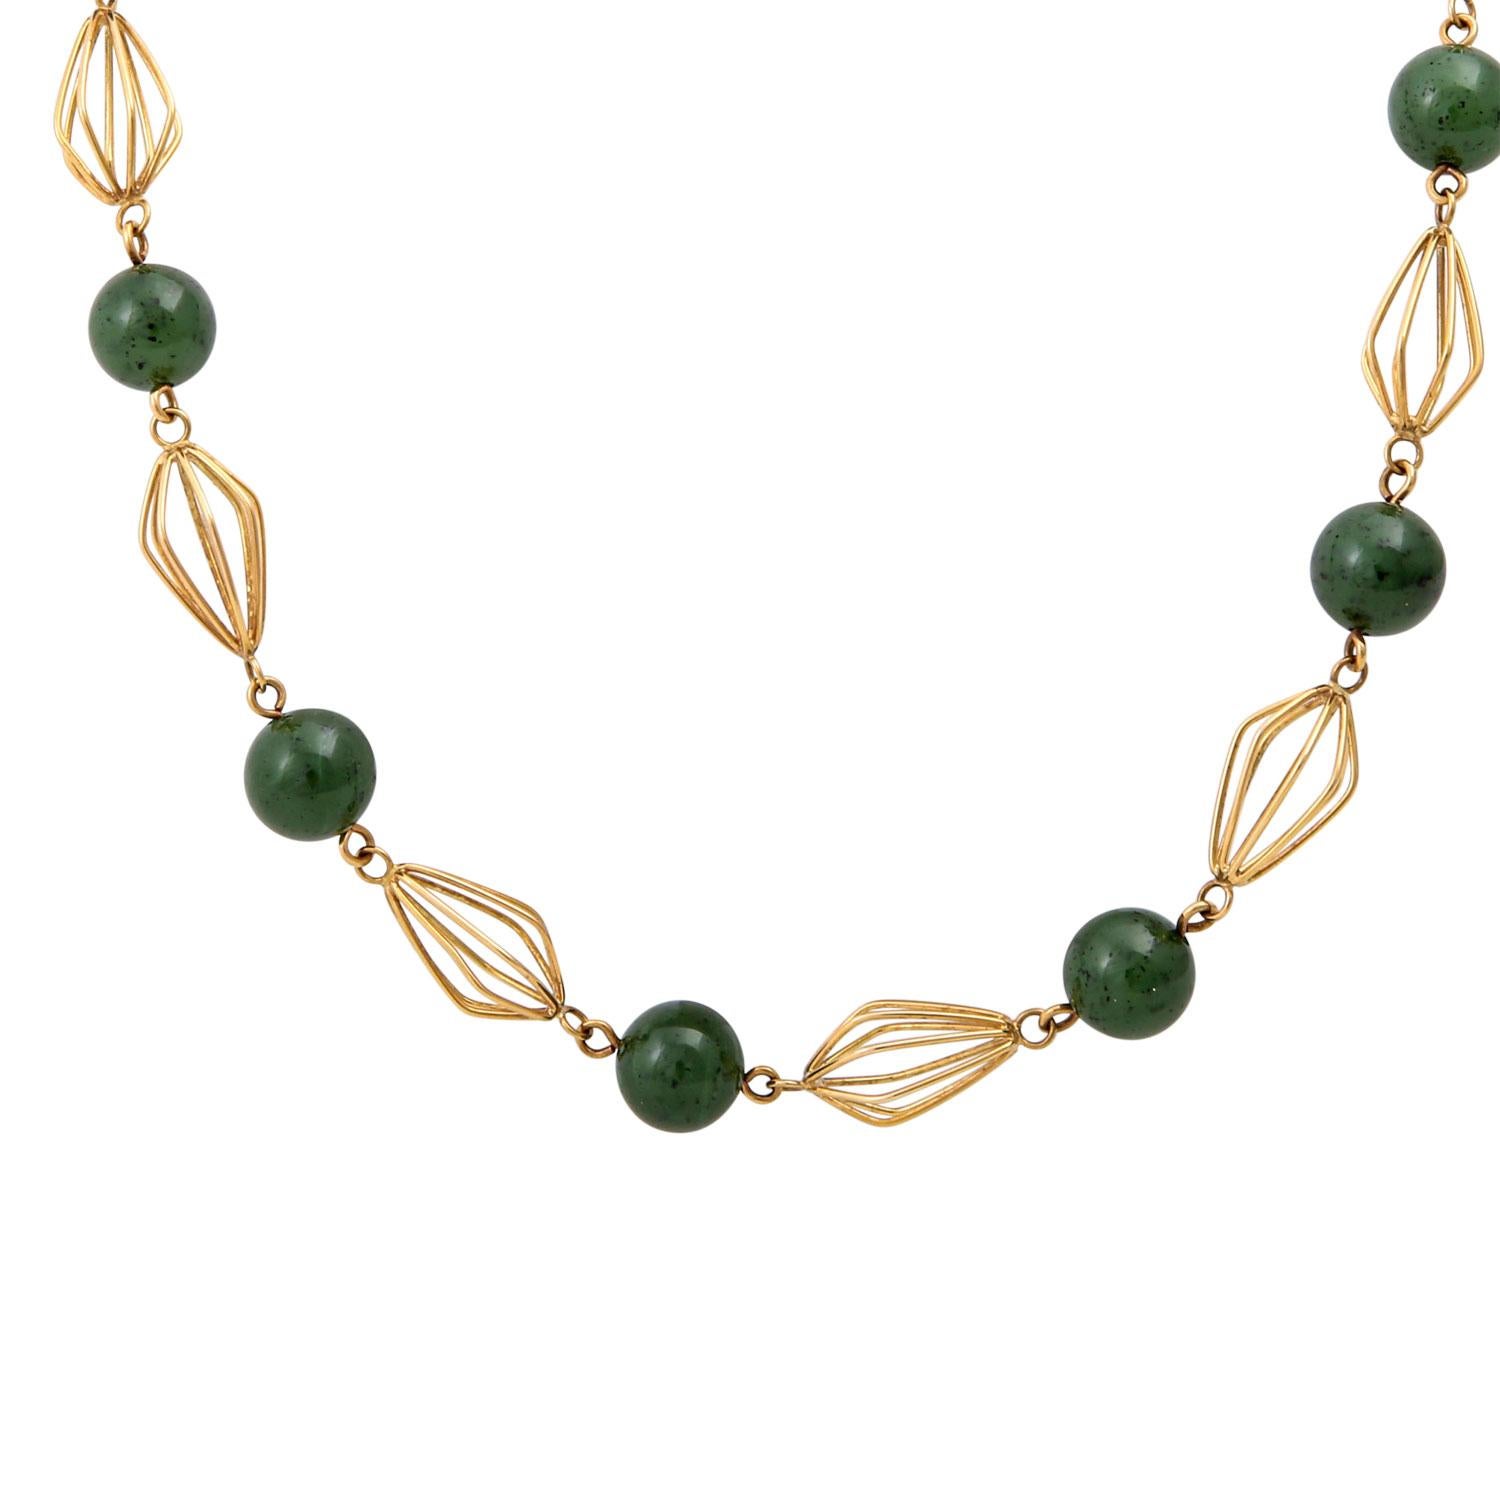 Chain set with 15 jade beads. GG 18K. L. approx. 56.5cm.